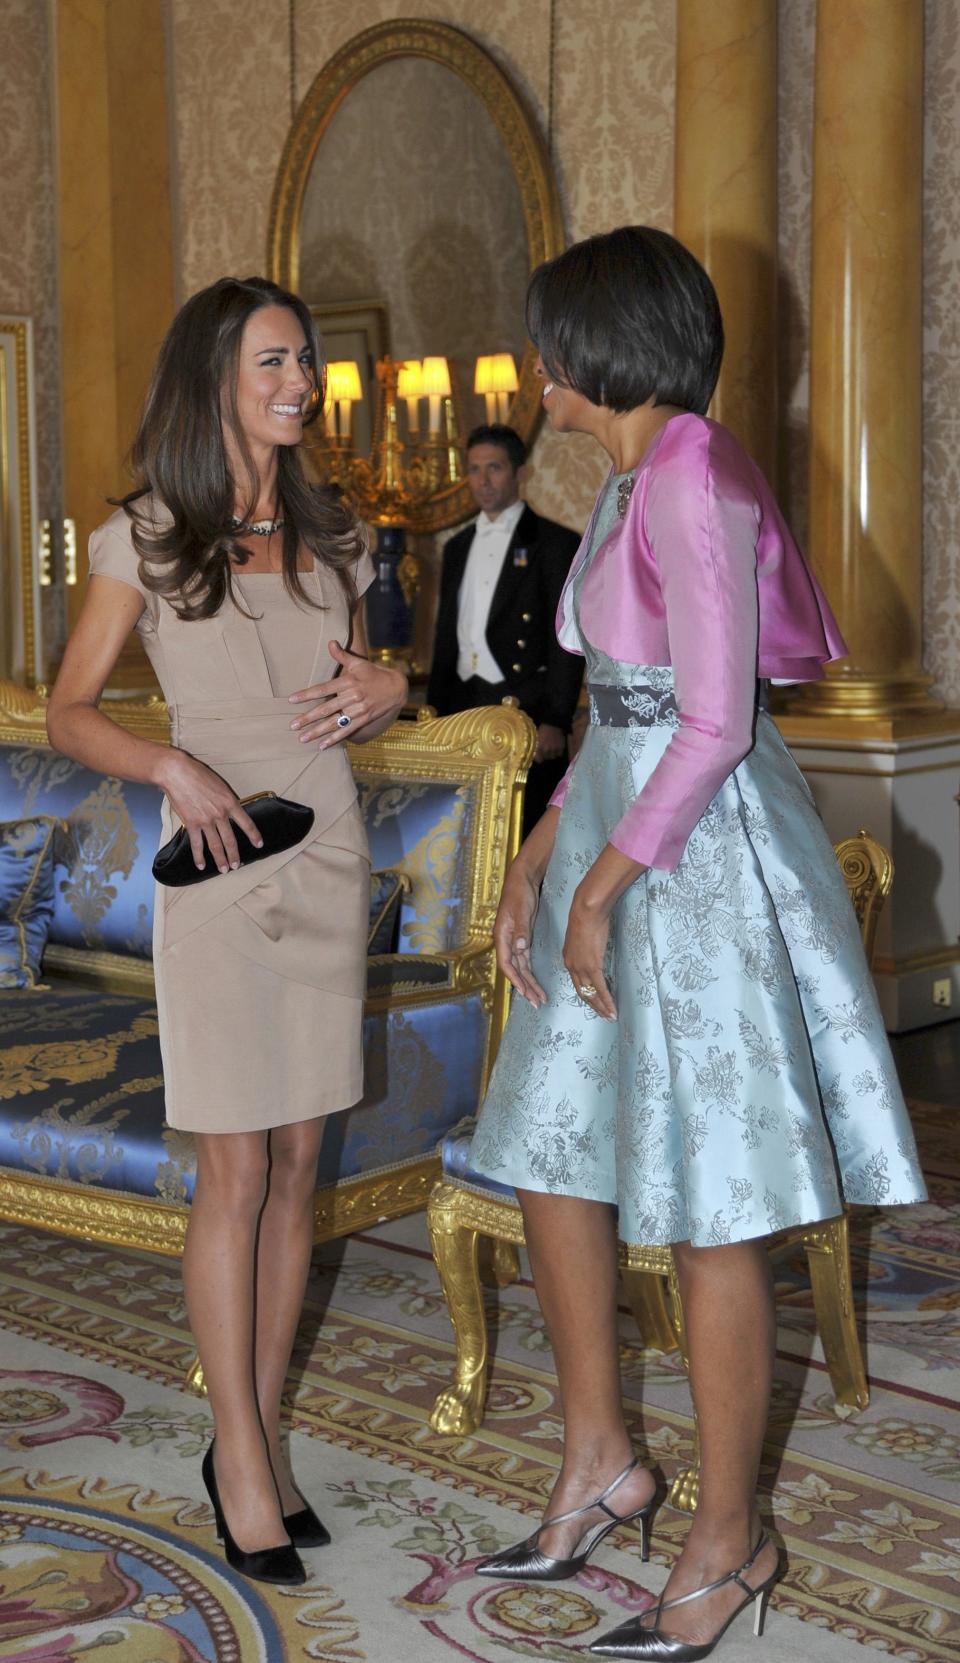 Photo by: (Photo by Toby Melville - WPA Pool/Getty Images)<br>First Lady Michelle Obama greets hosed-up Kate on a visit to Buckingham Palace-<br>Though she's donned hose for certain diplomatic events, the first lady has professed to despising the sheer tights, and it looks like she may have shirked off the unspoken code on a trip to the palace. Kate, however, kept her legs covered in "sheer elegance".